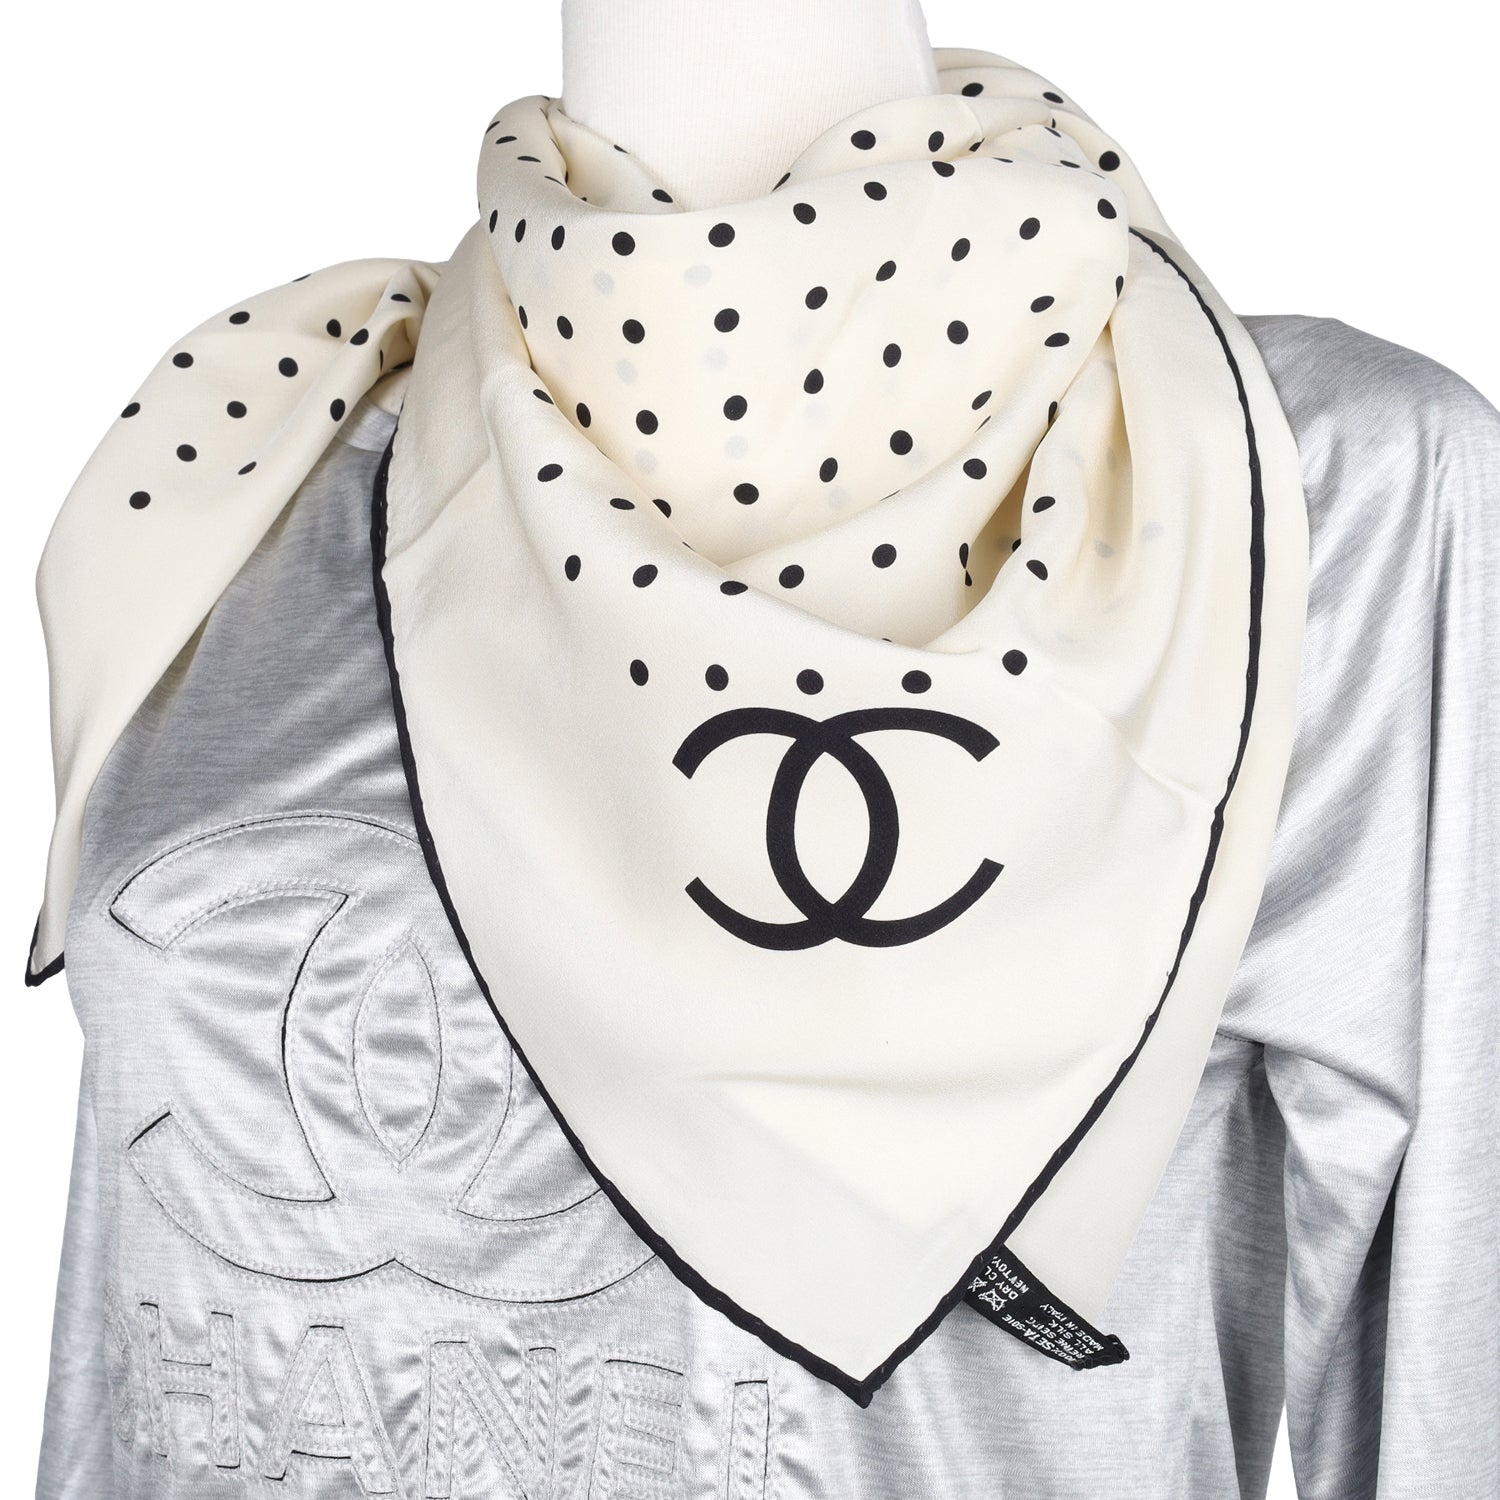 Vintage Chanel Scarf in Beige & Dots Silk (Authentic Pre-Owned) – The Lady Bag